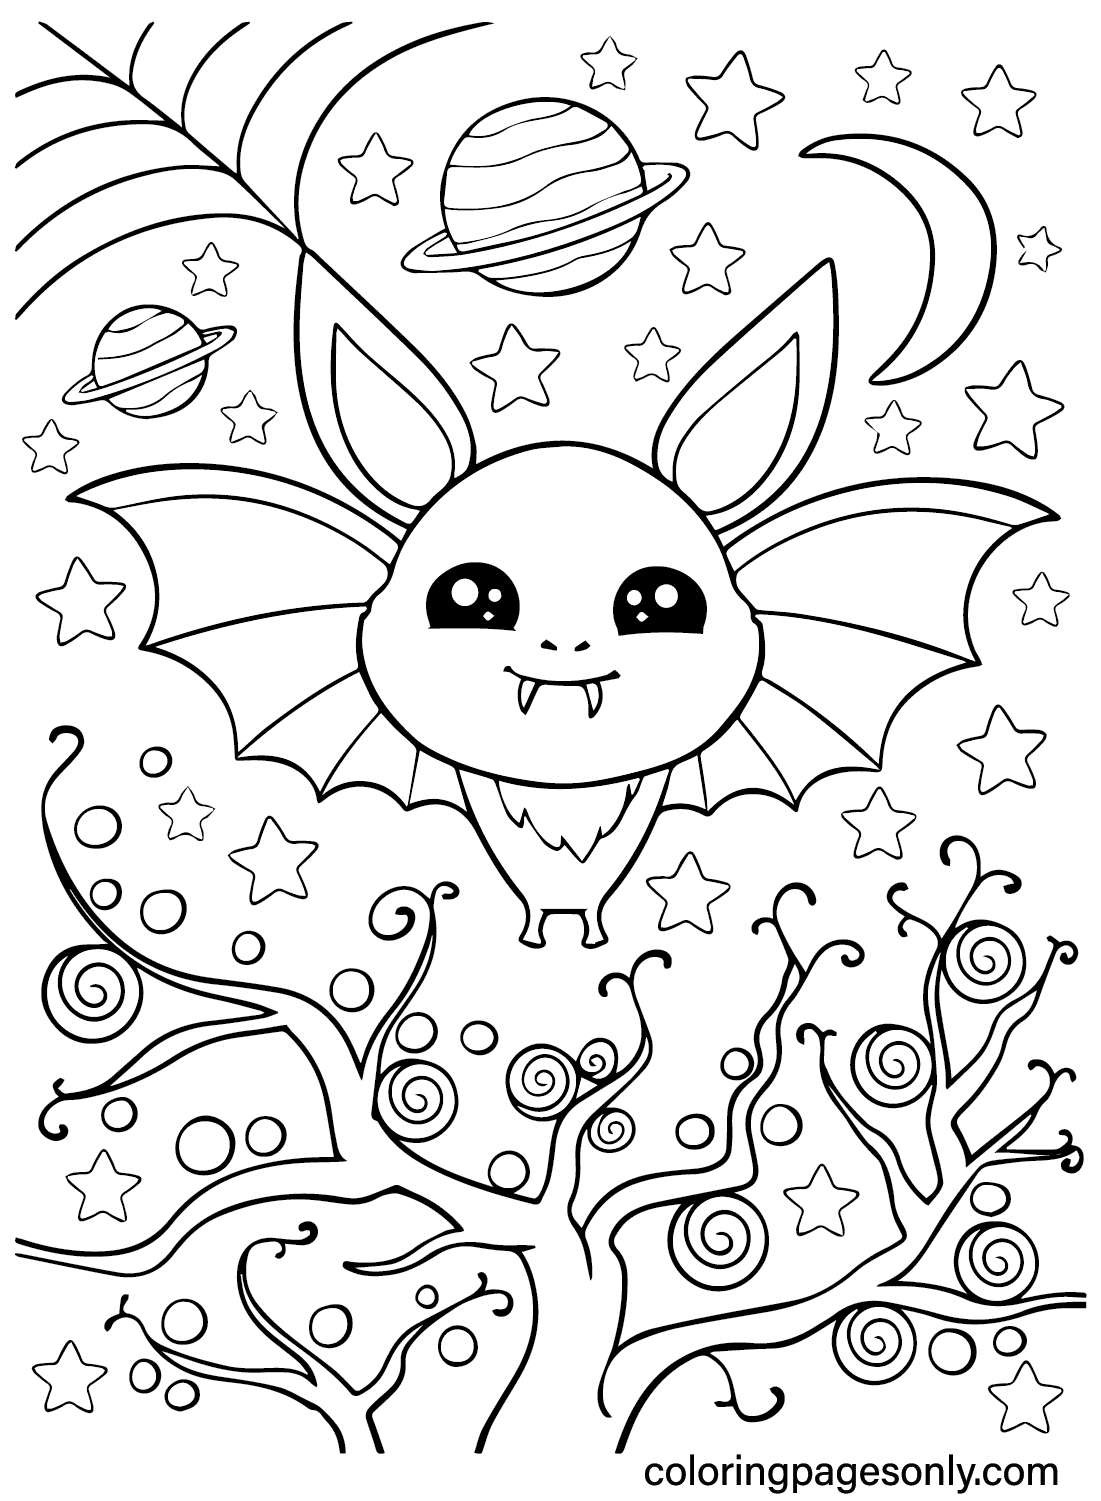 Cute Halloween Printable Coloring Page Free Printable Coloring Pages